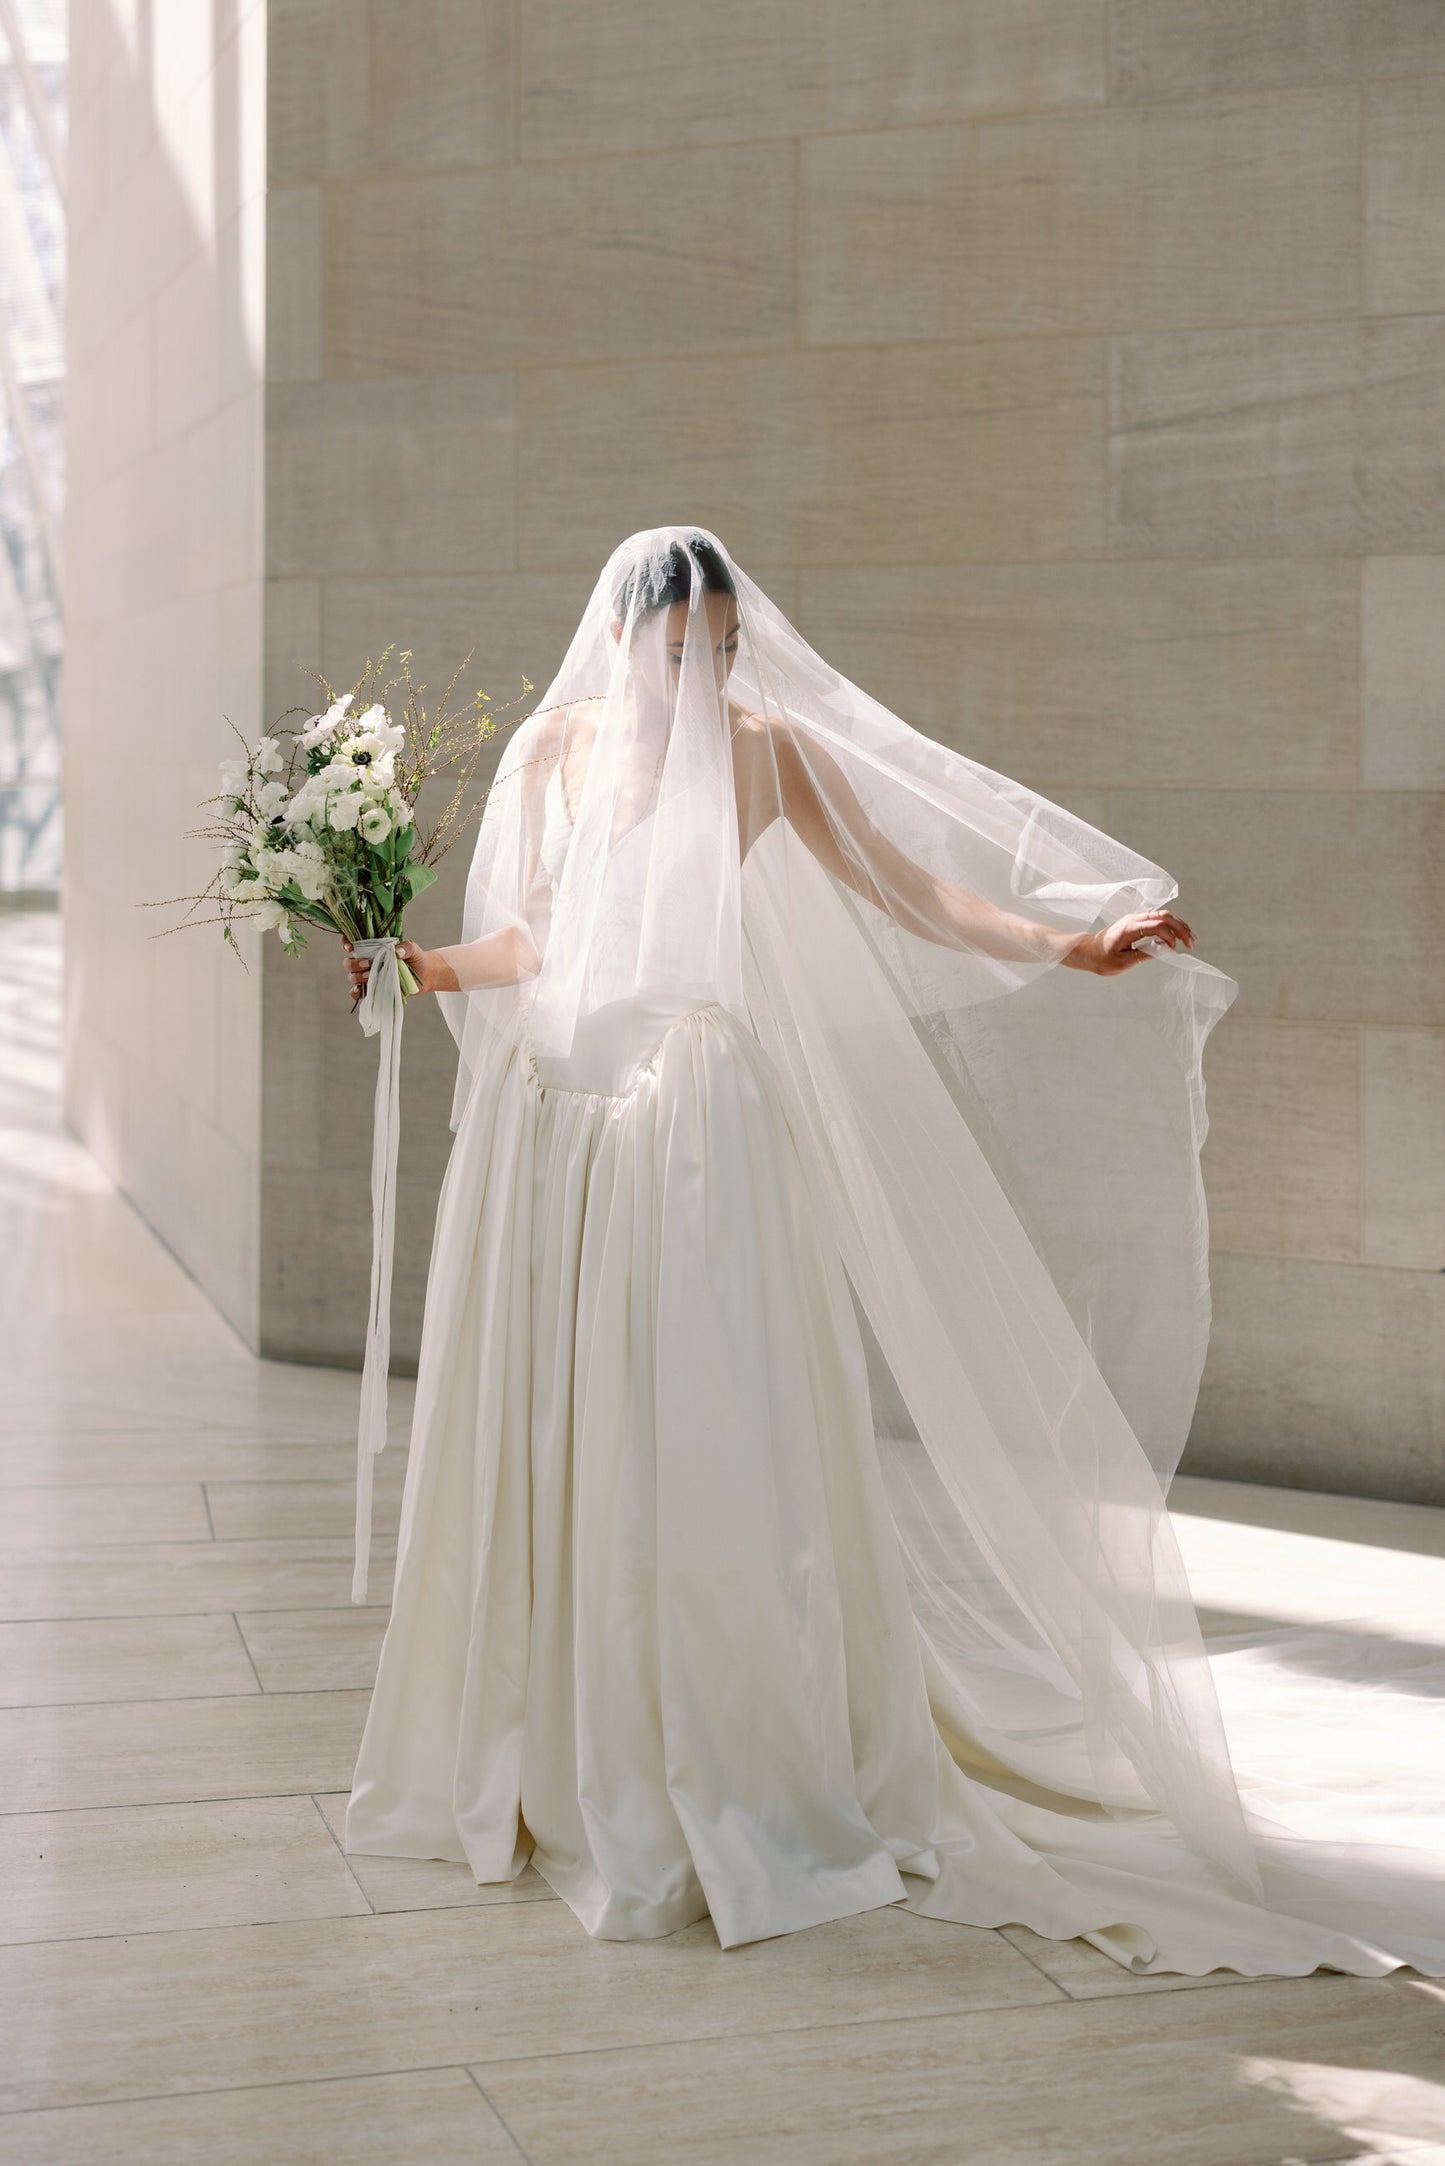 TOPQUEEN V116 Bridal Cathedral Drop Veil 2 Layers Wedding Veil